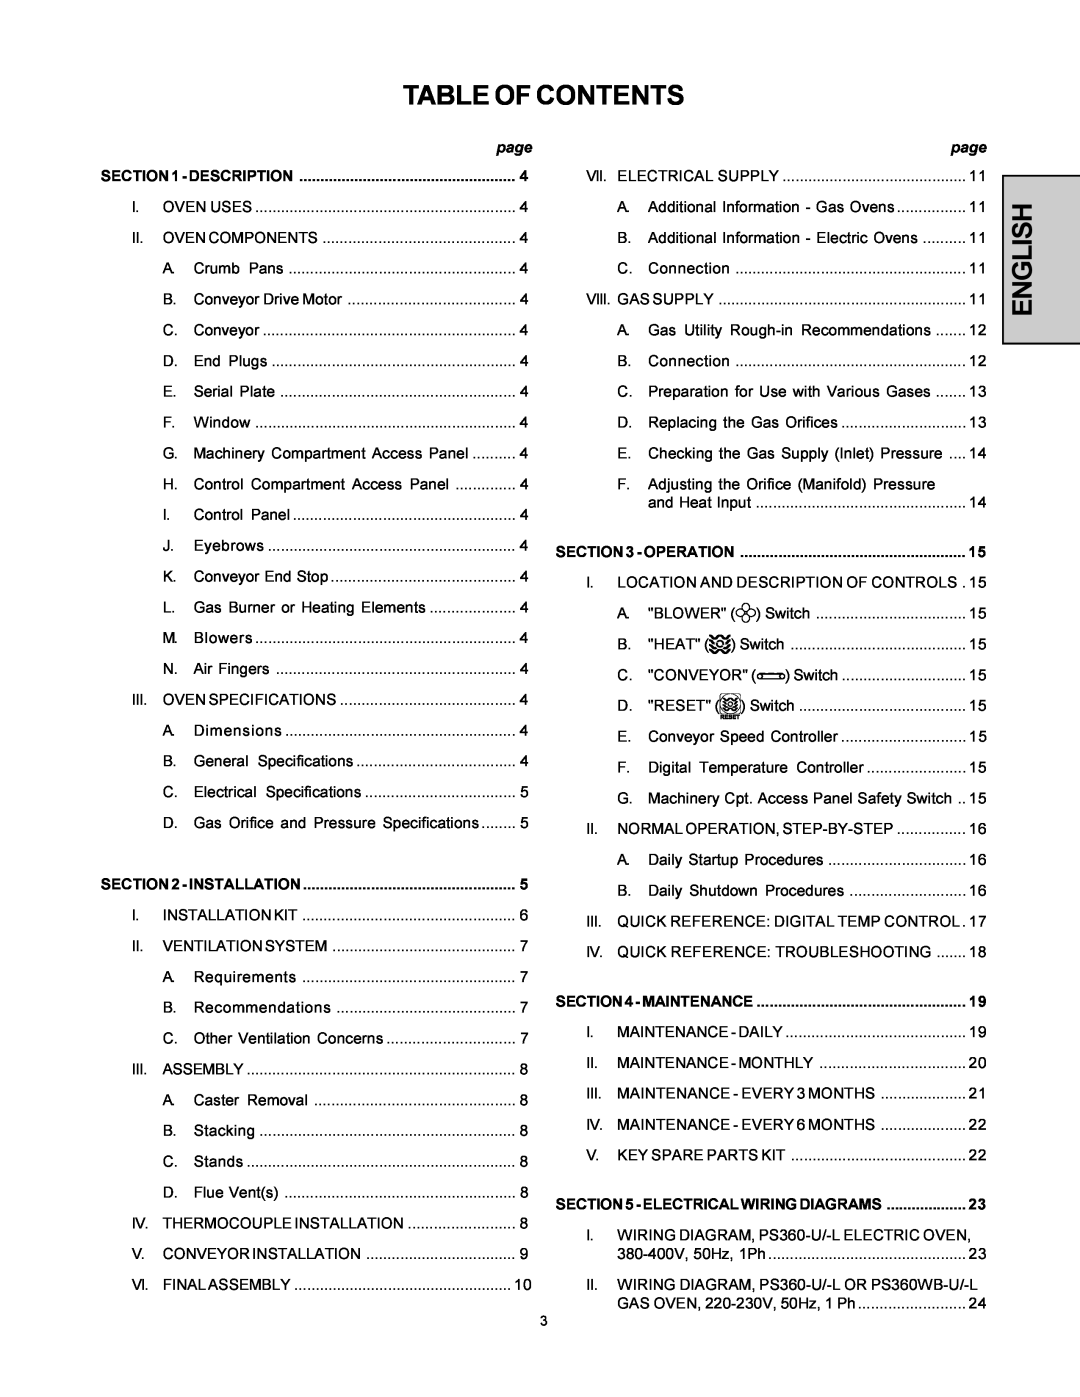 Middleby Marshall PS360-L, PS360WB-U Table Of Contents, English, page, Maintenance, Electrical Wiring Diagrams 